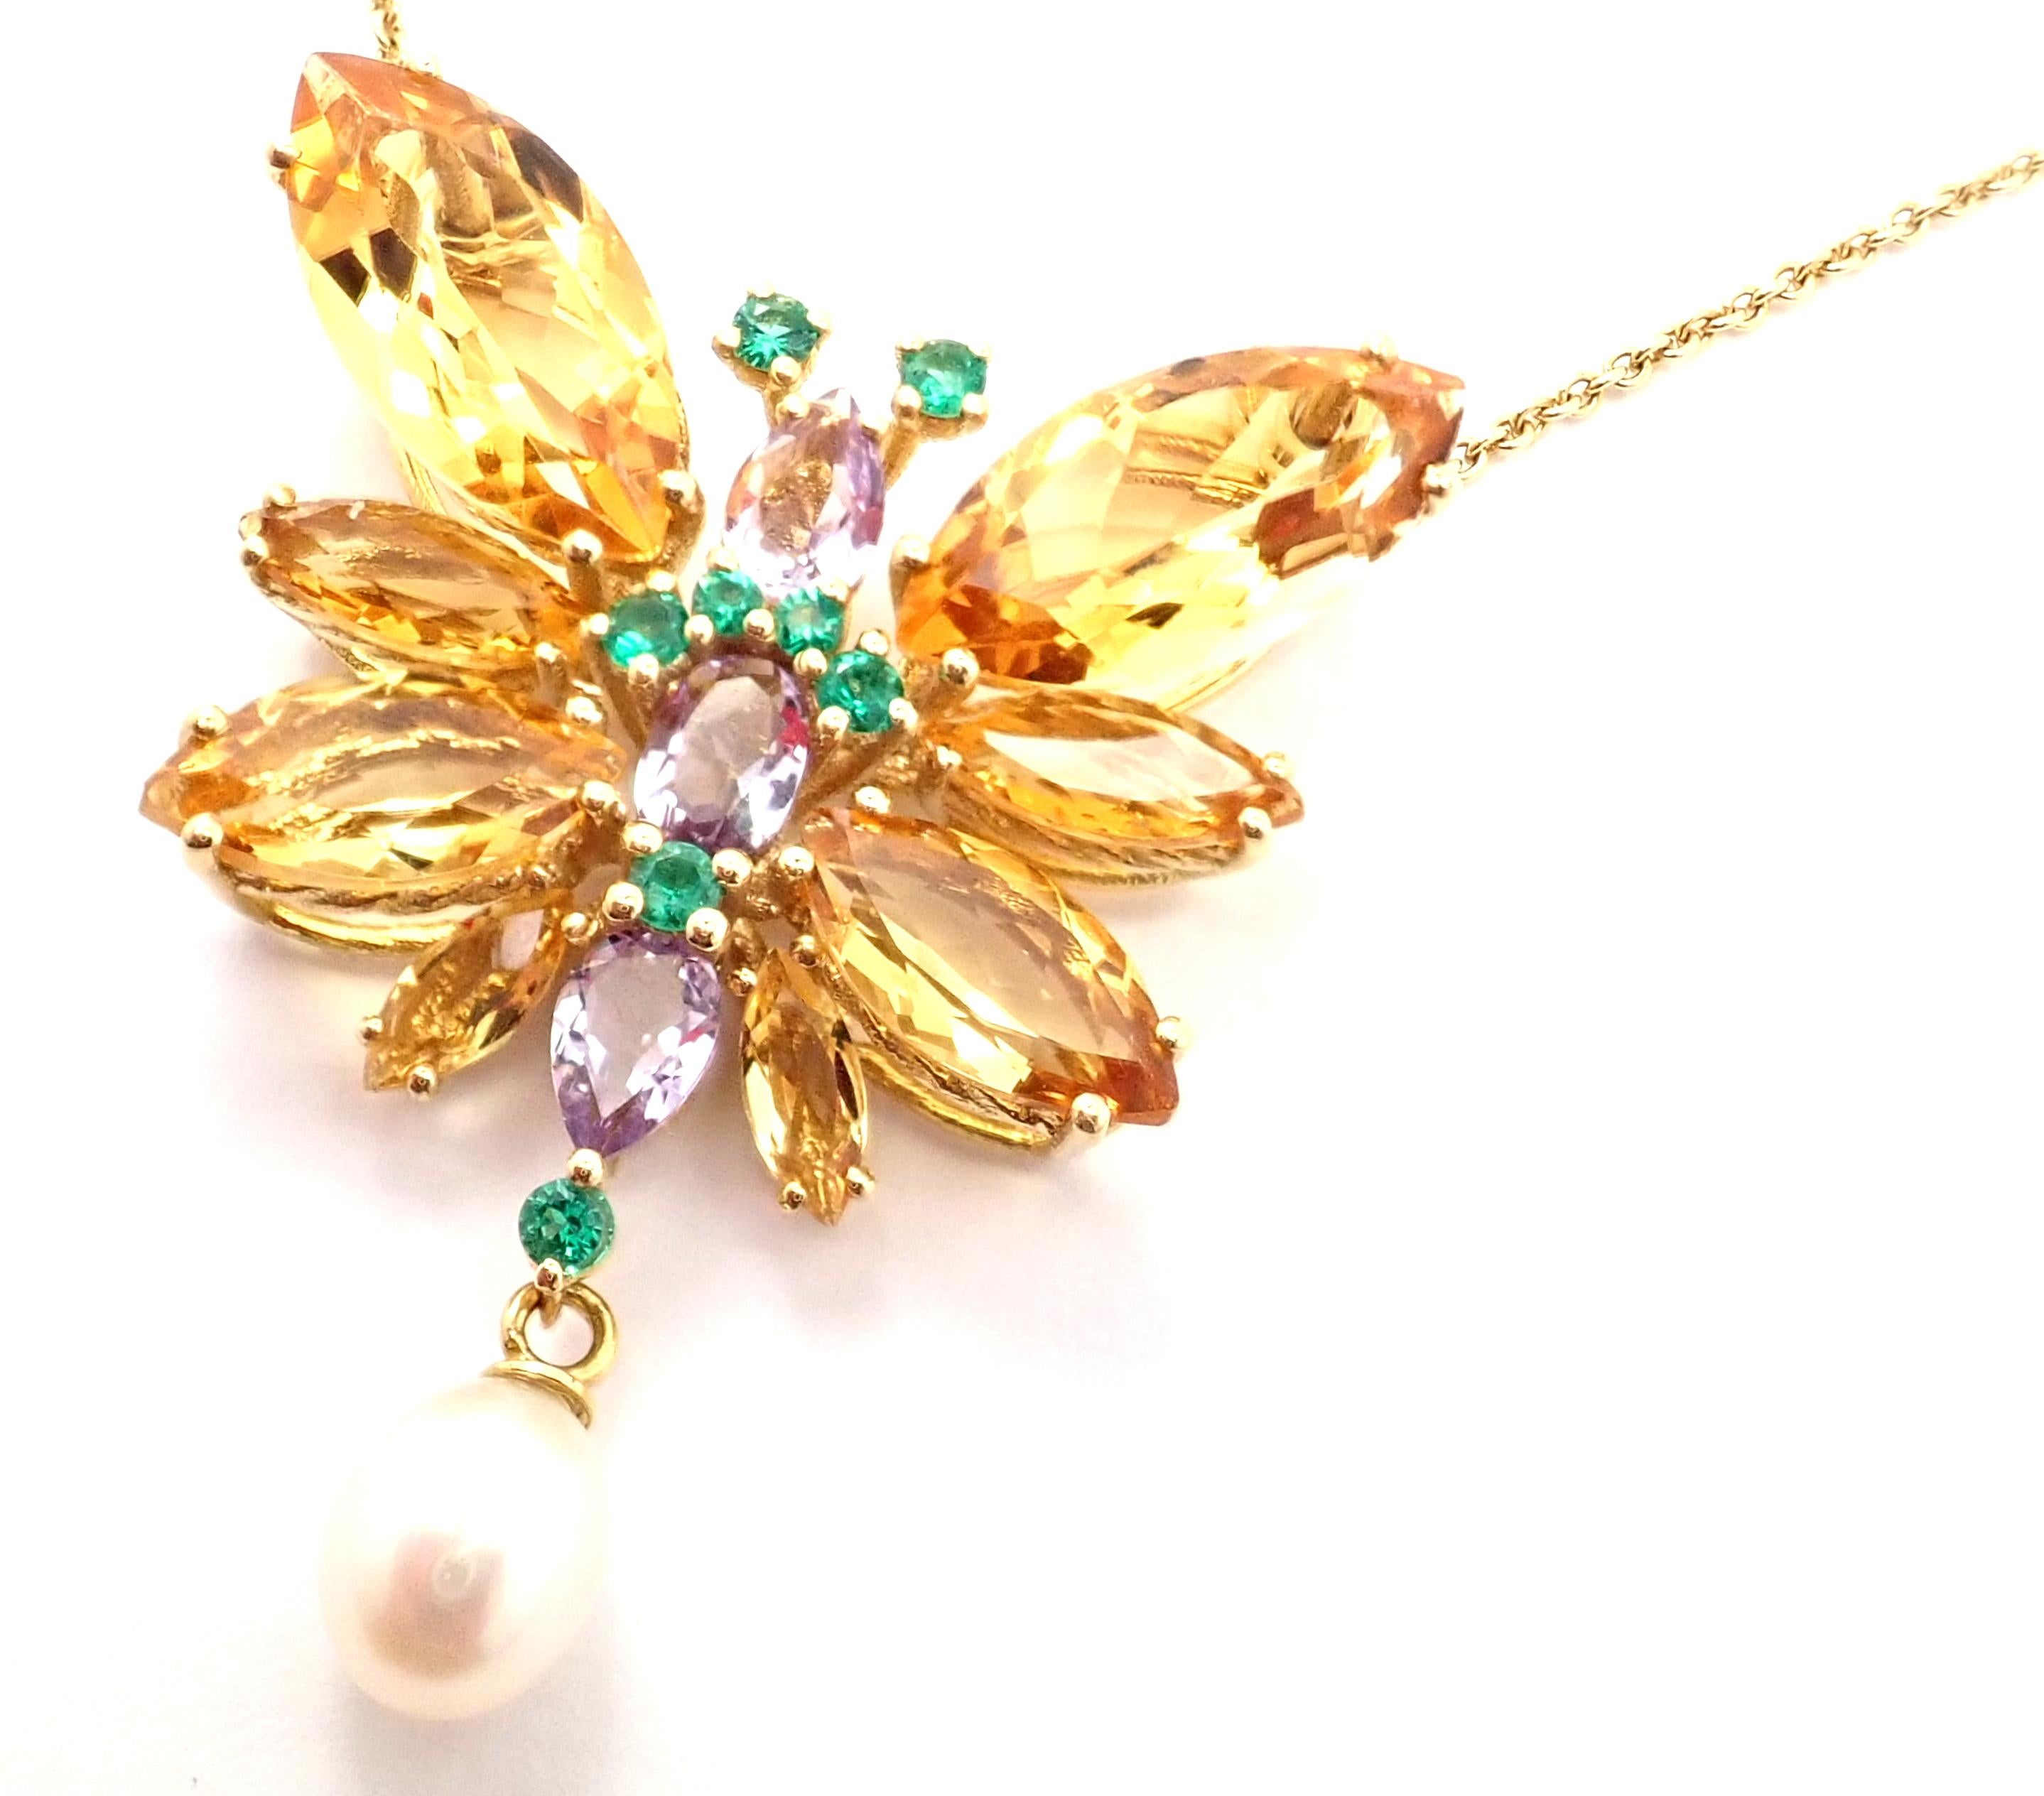 18k Yellow Gold Citrine Amethyst Emerald Butterfly Spring Pendant Necklace by Dolce & Gabbana. 
With 8 marquise citrines, quartz variety, 3 drop-shaped and oval amethysts, quartz variety, 8 round brilliant-cut emeralds, 2 freshwater drop